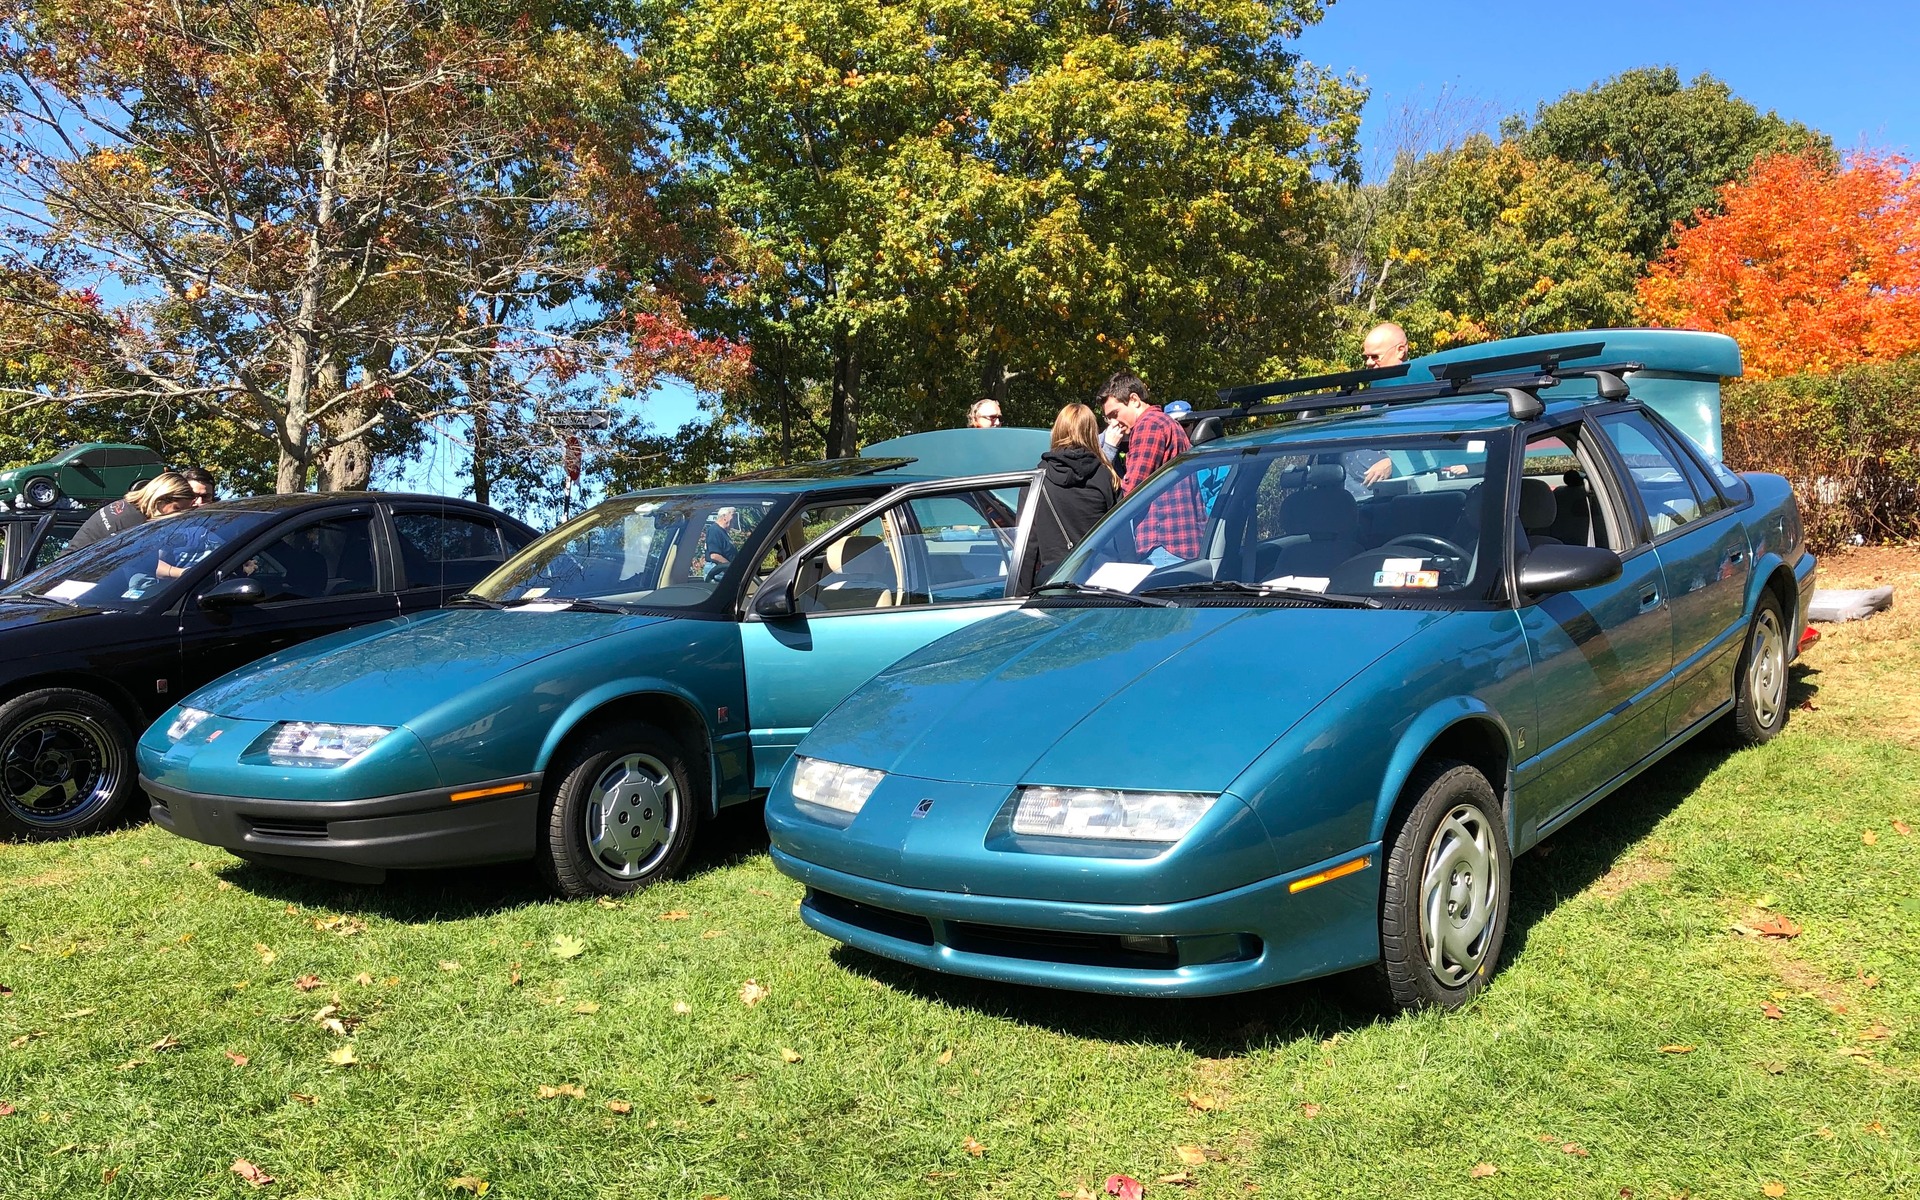 <p><strong>1994 Saturn SL1 and 1995 Saturn SL2</strong></p>